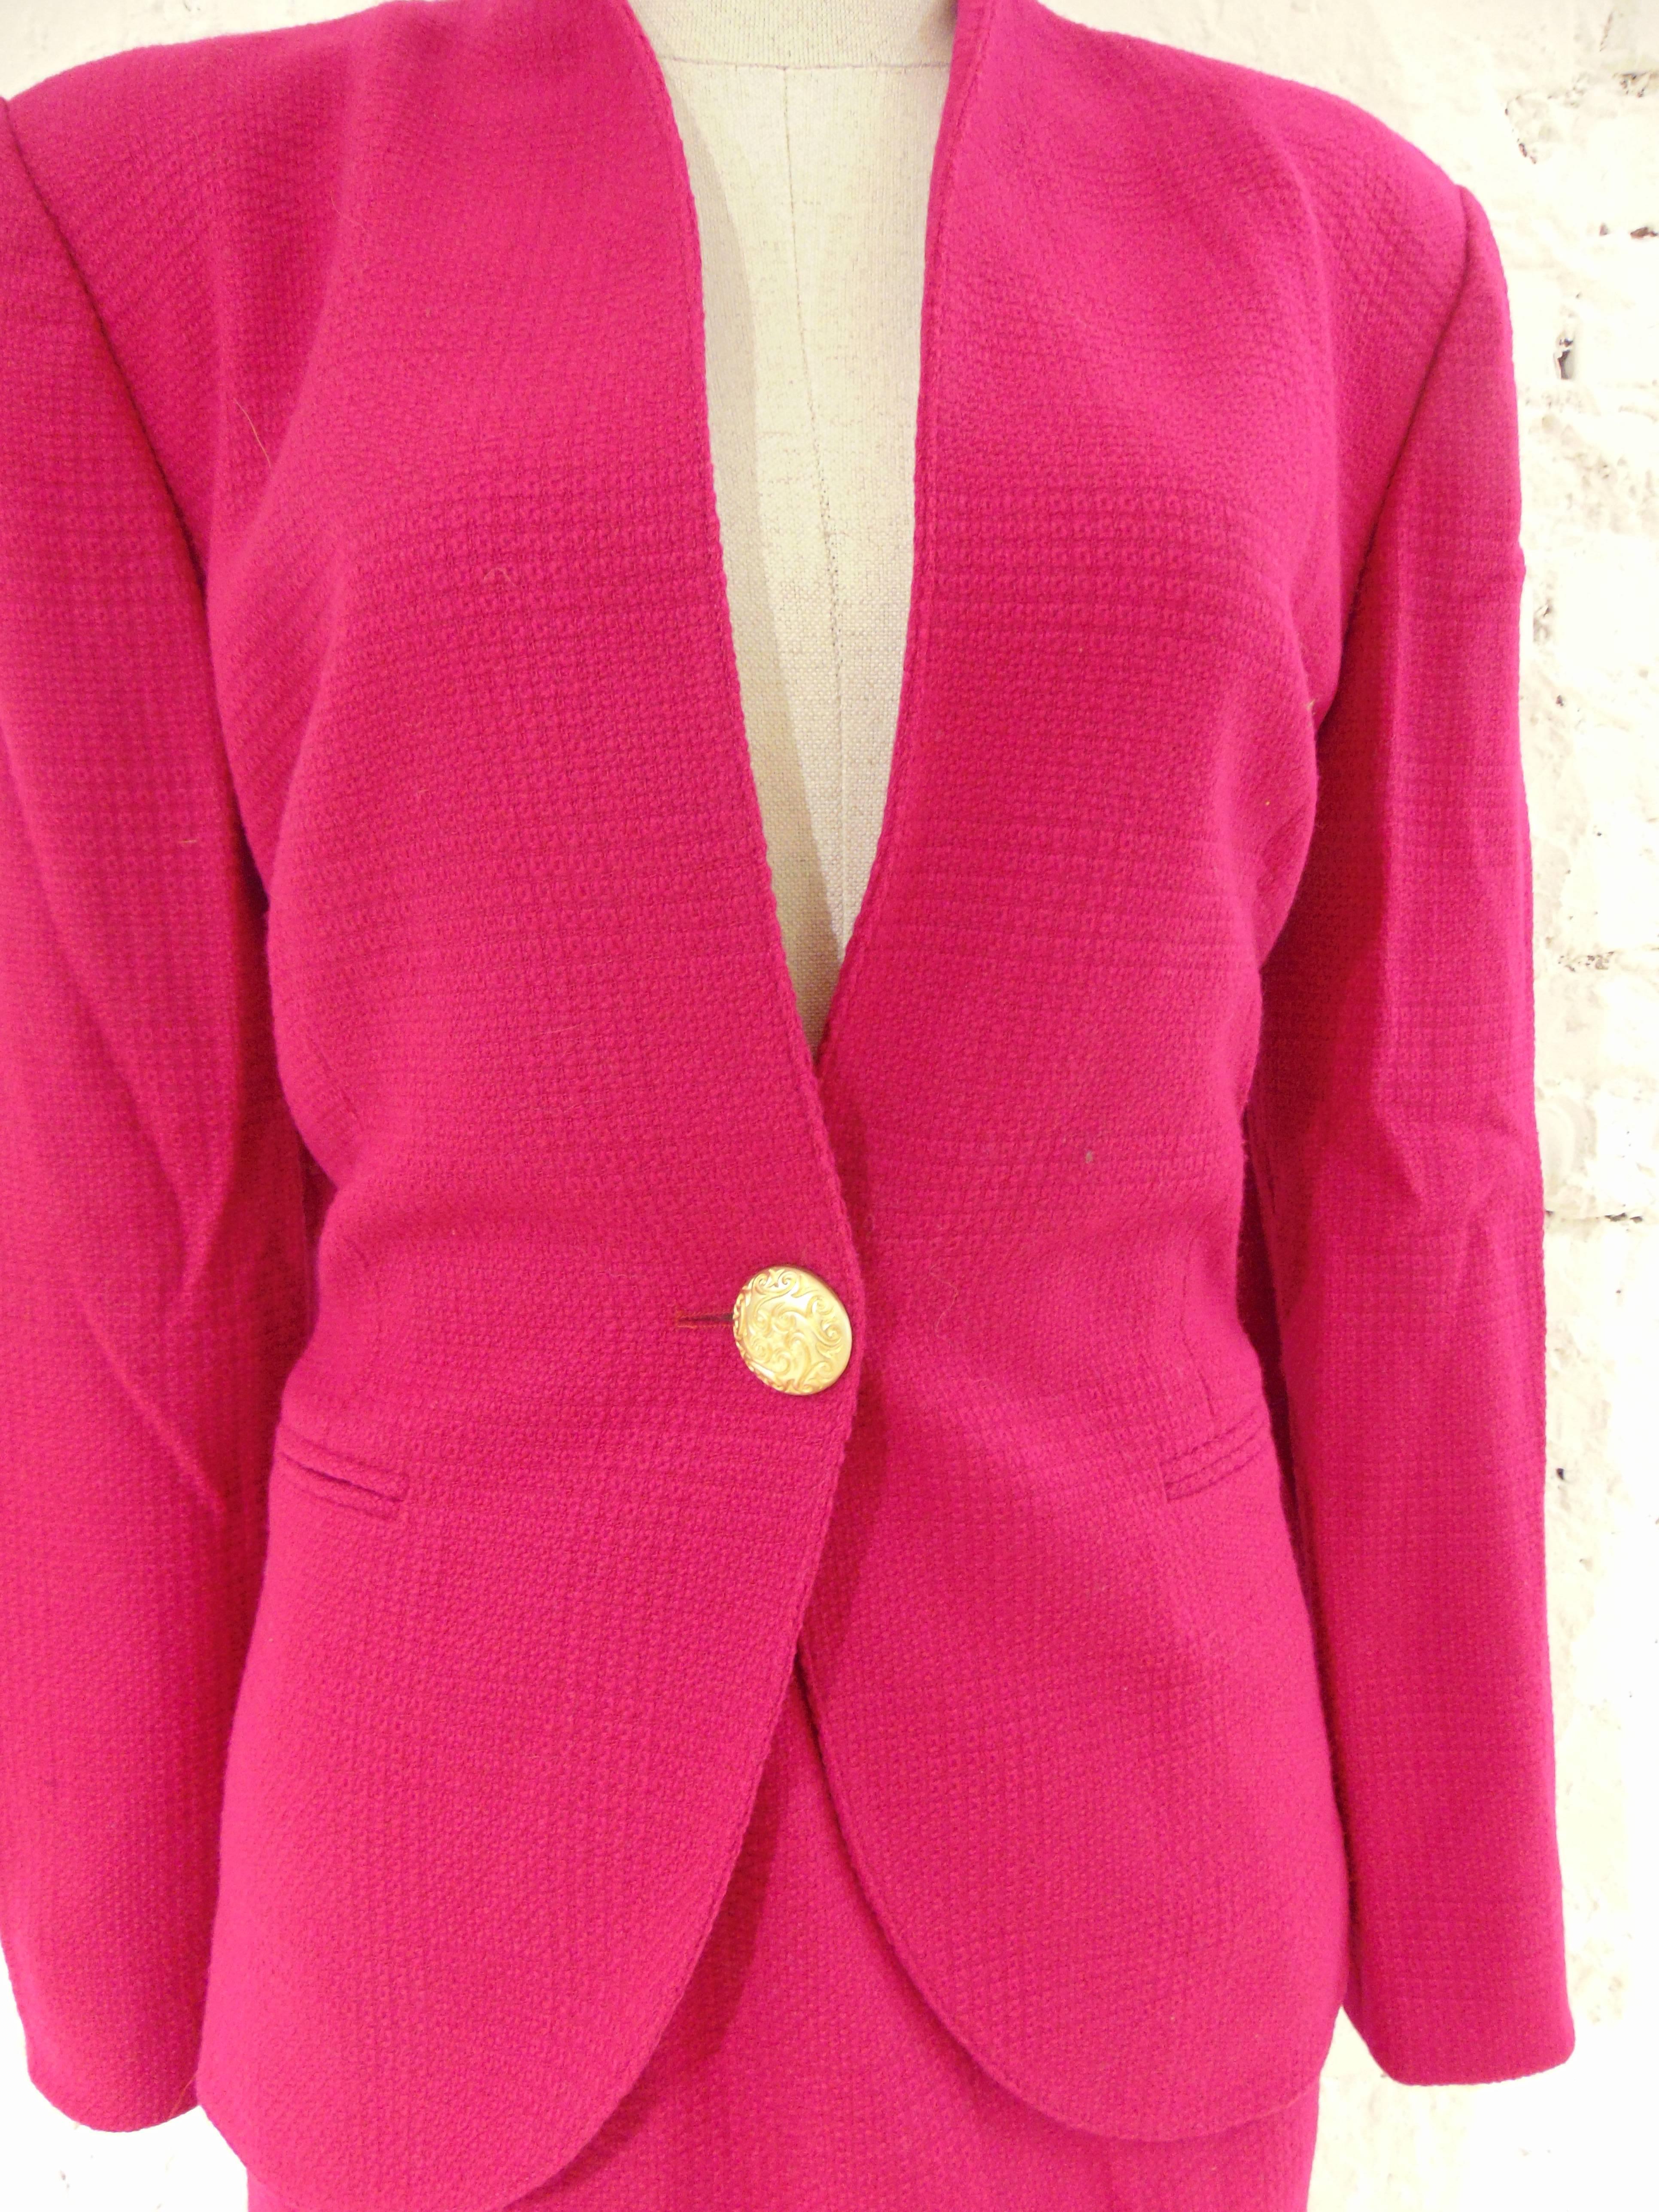 Luisa Spagnoli fucsia wool skirt suit 

totally made in italy in size 44